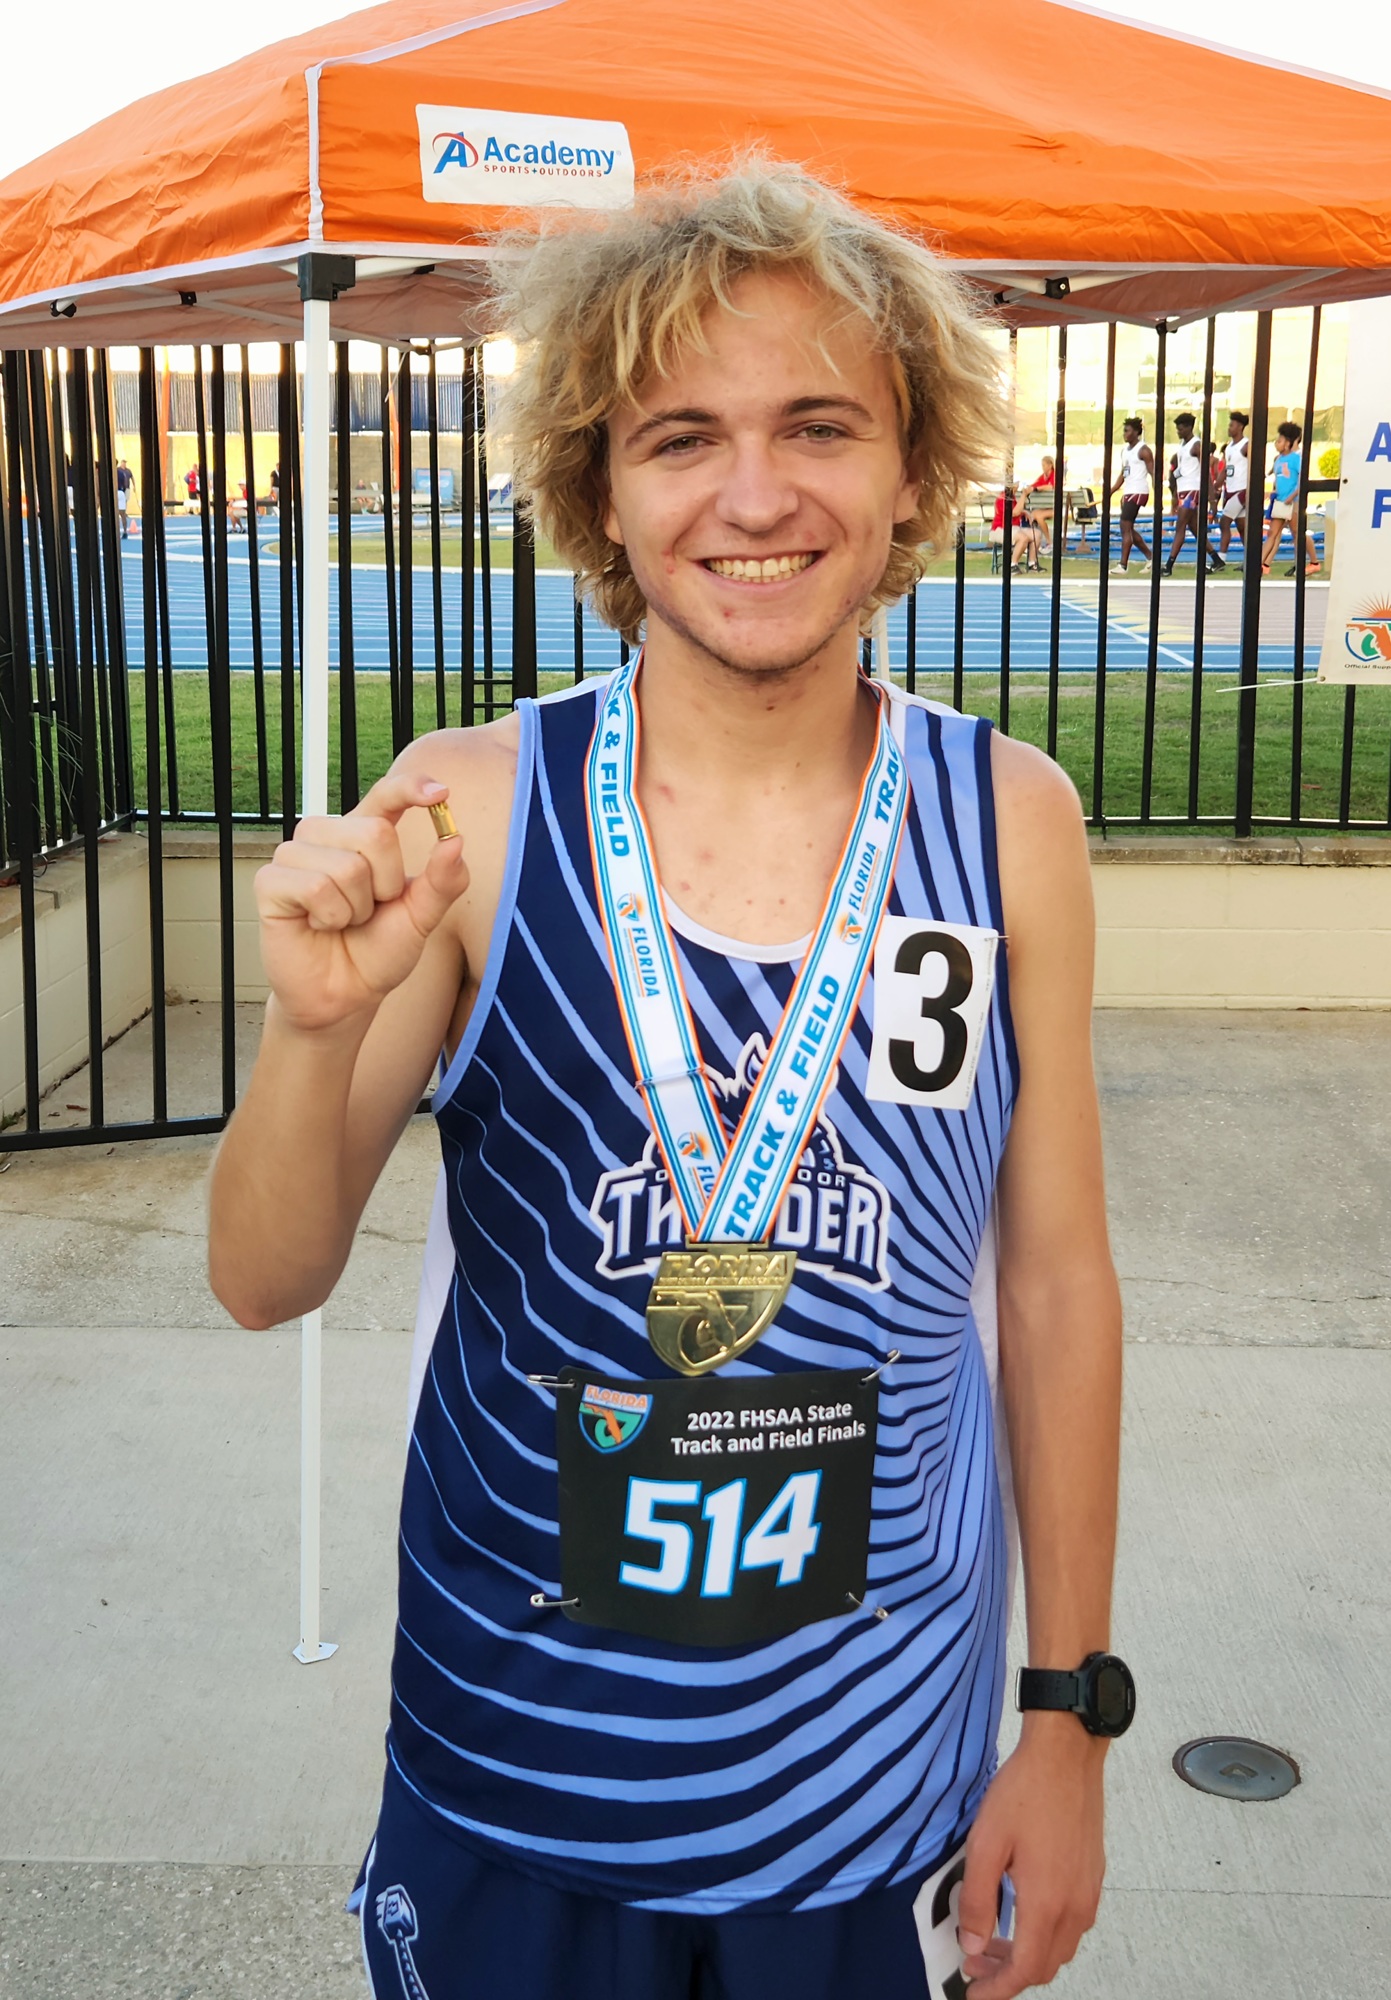 2. ODA senior Tristan McWilliam won the gold medal in the boys 1,600 meter run at the FHSAA Class 1A track and field championships (4:17.97).